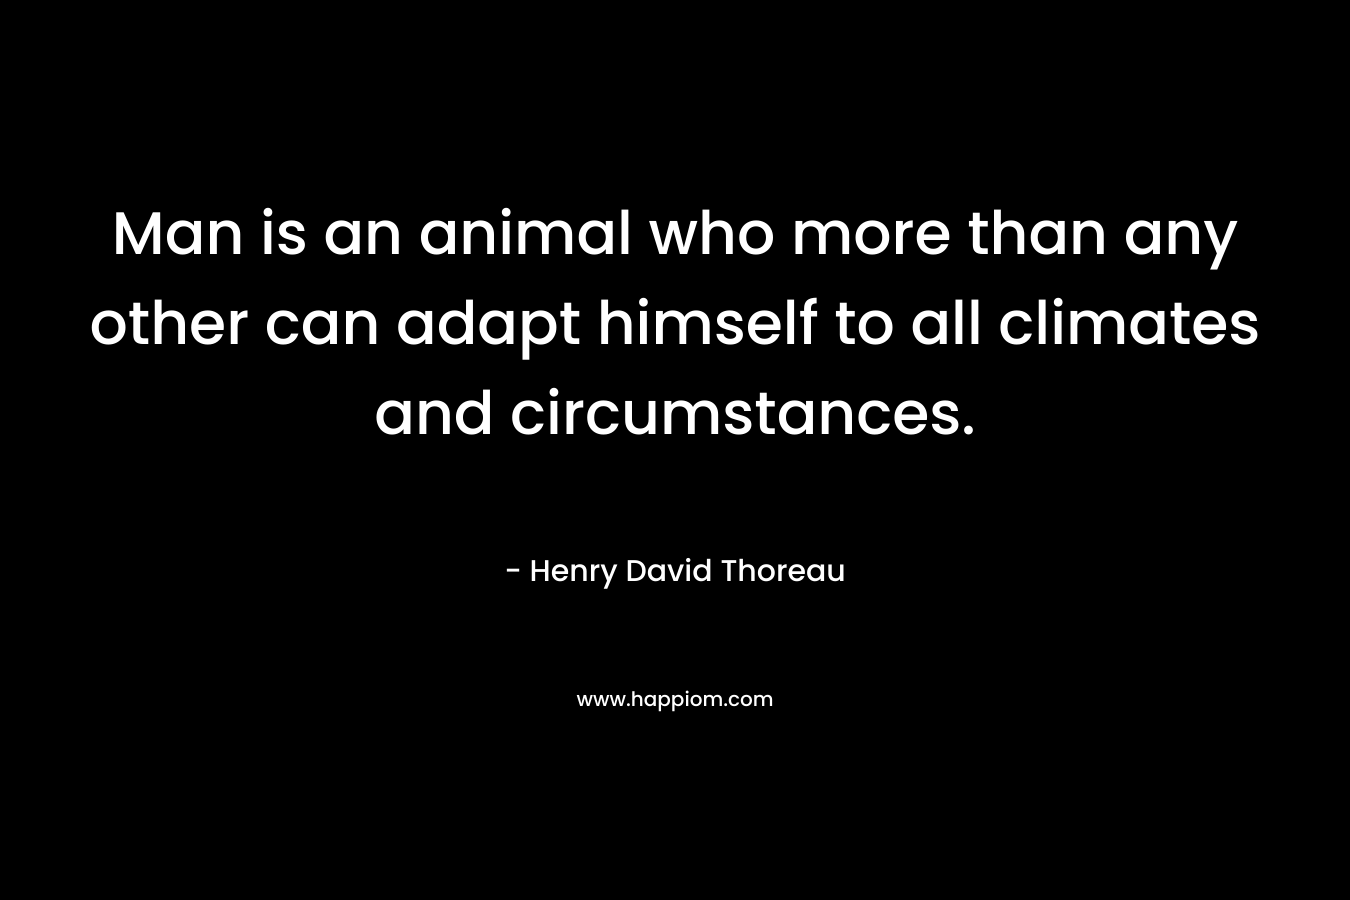 Man is an animal who more than any other can adapt himself to all climates and circumstances. – Henry David Thoreau